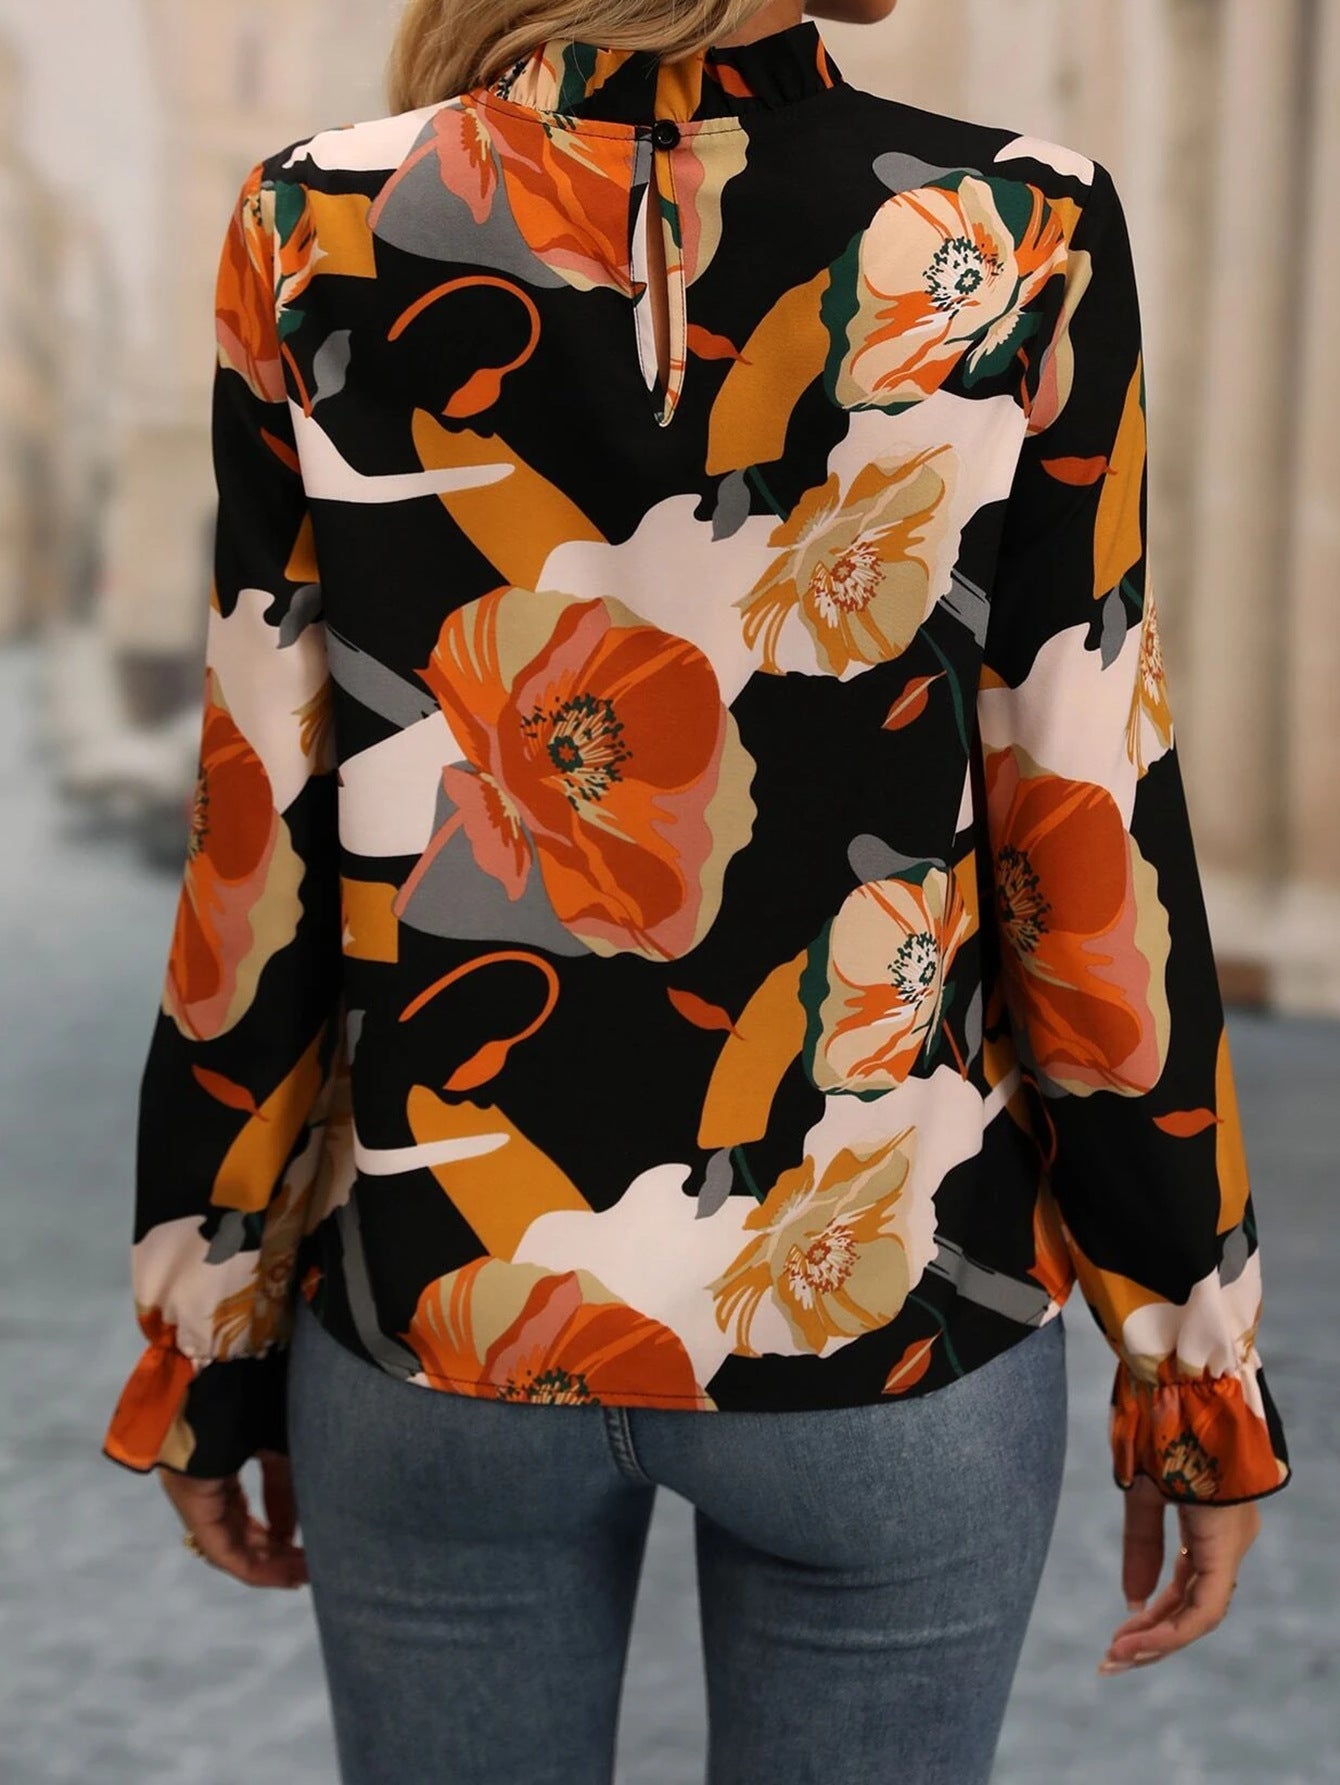 Women's Round Neck Printed Long Sleeve  Blouse Shirt Top